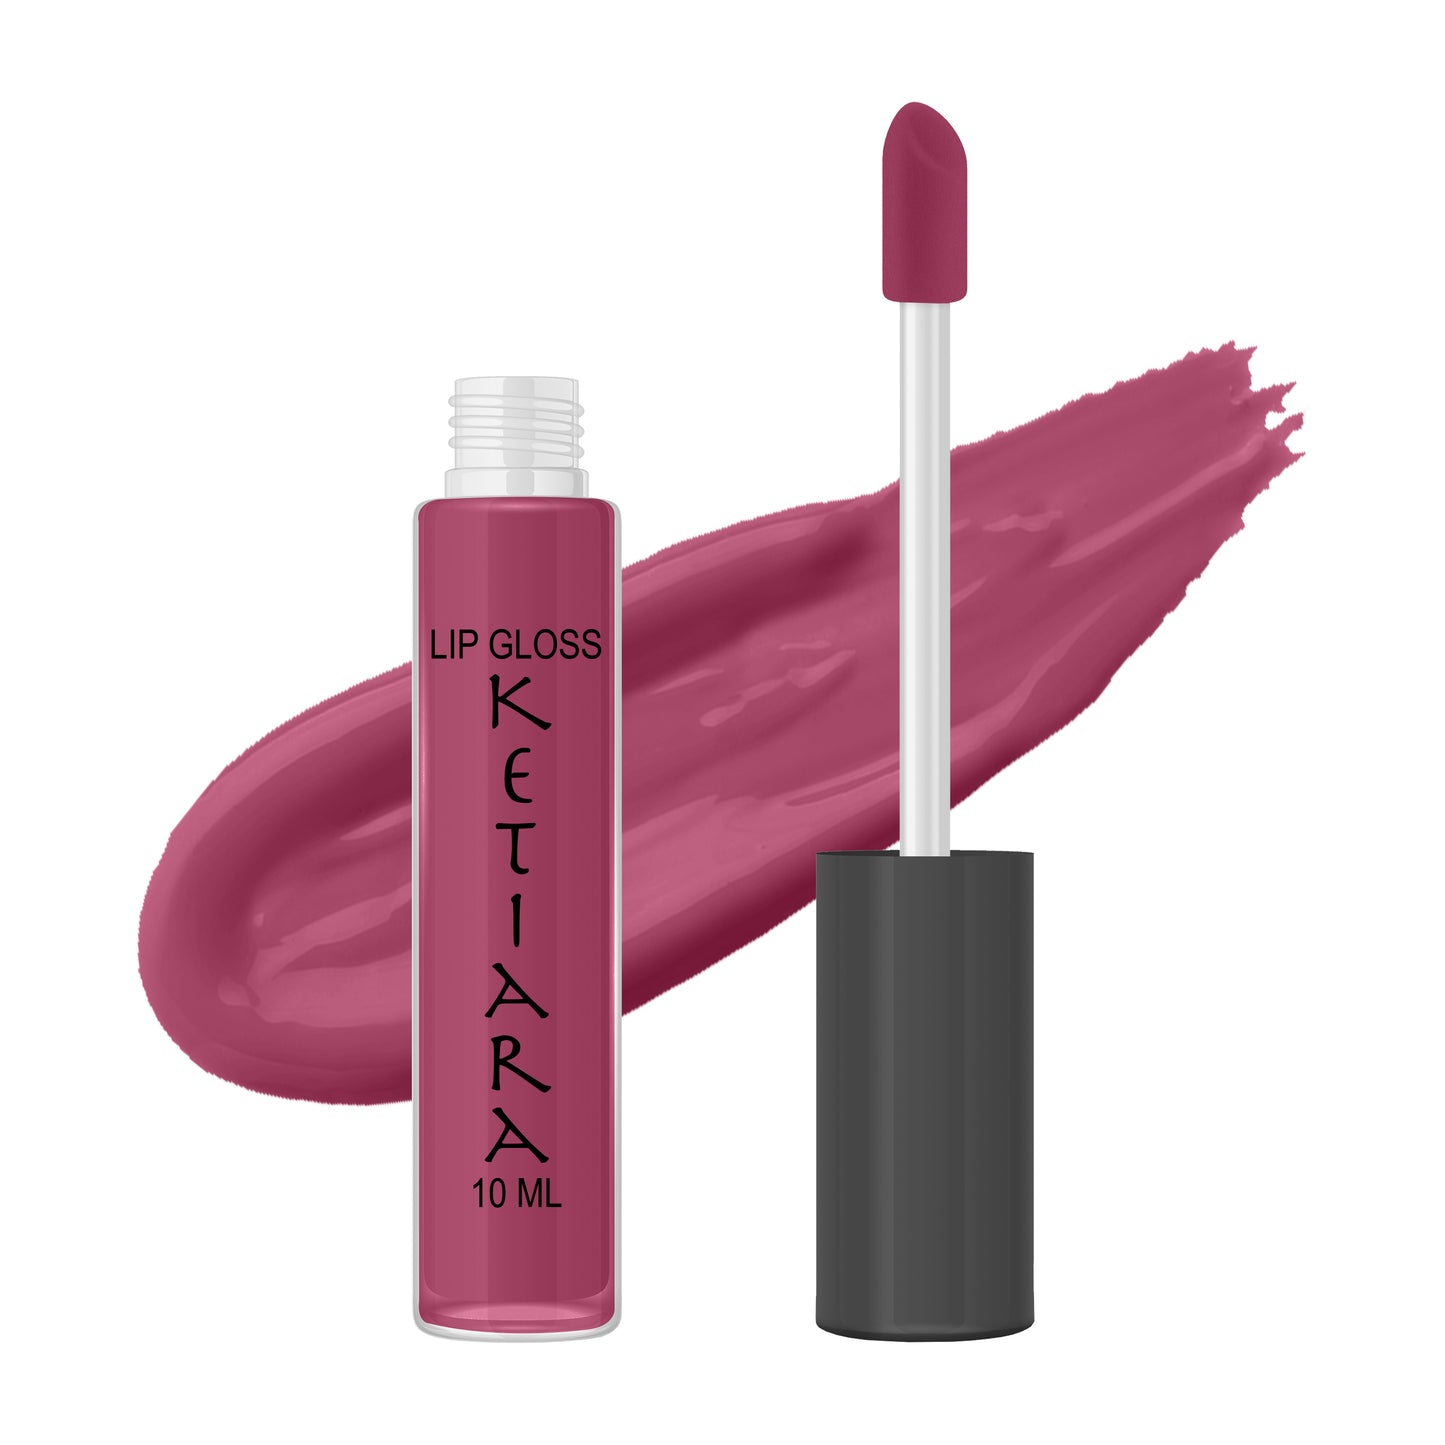 Plum Hydrating And Moisturizing Non-sticky Premium Mild Tinting Lip Gloss Infused With Hyaluronic Acid